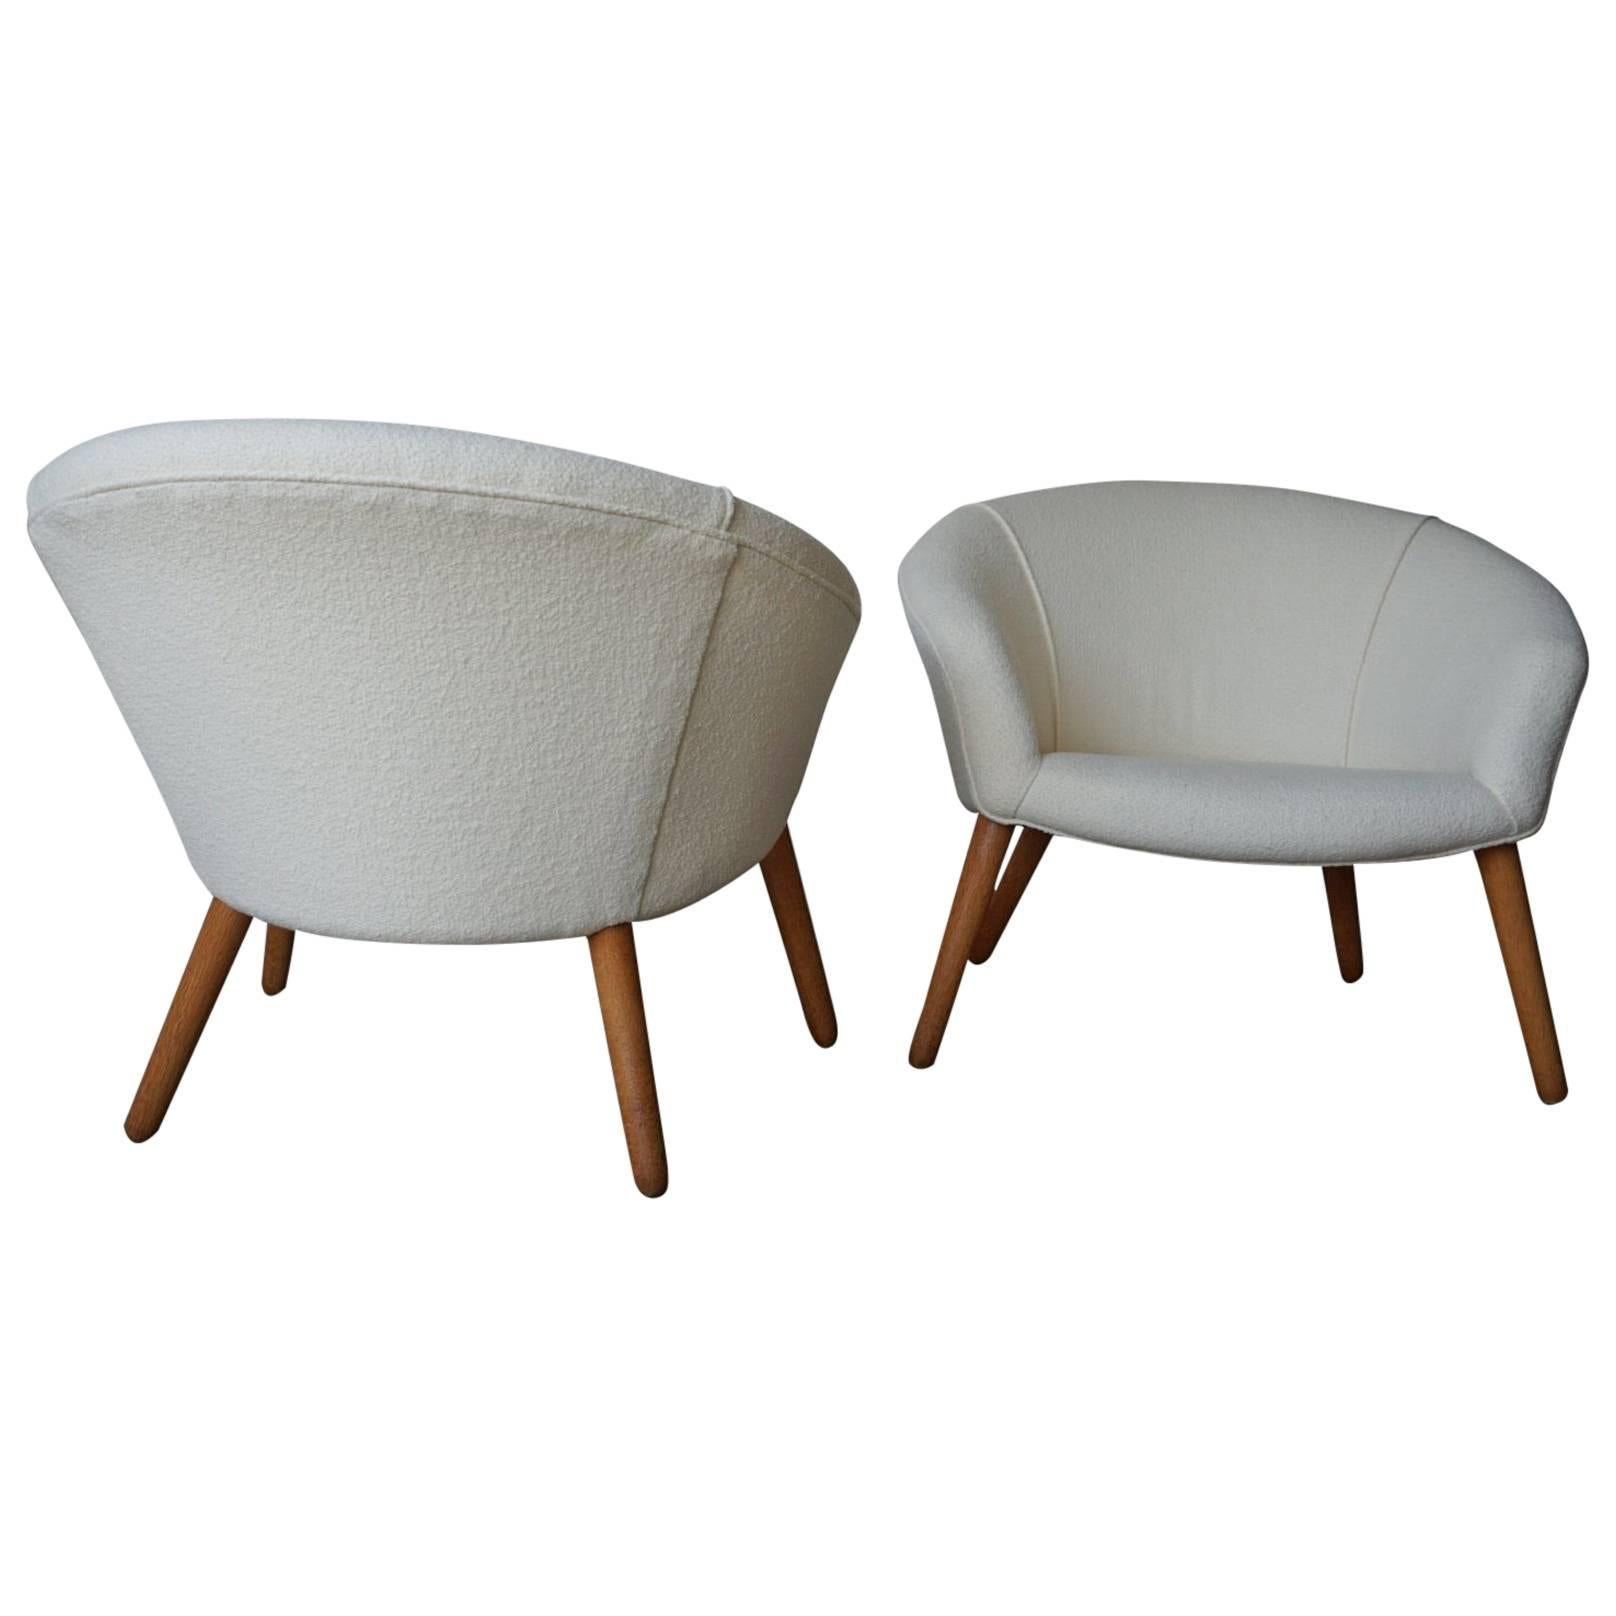 Stunning pair of model AP 26 “Pot Chairs” by Nanna Ditzel, and produced by AP Stolen, circa 1953. Recently restored in a beautiful pearl-colored Knoll bouclé fabric. Tapered oak legs.